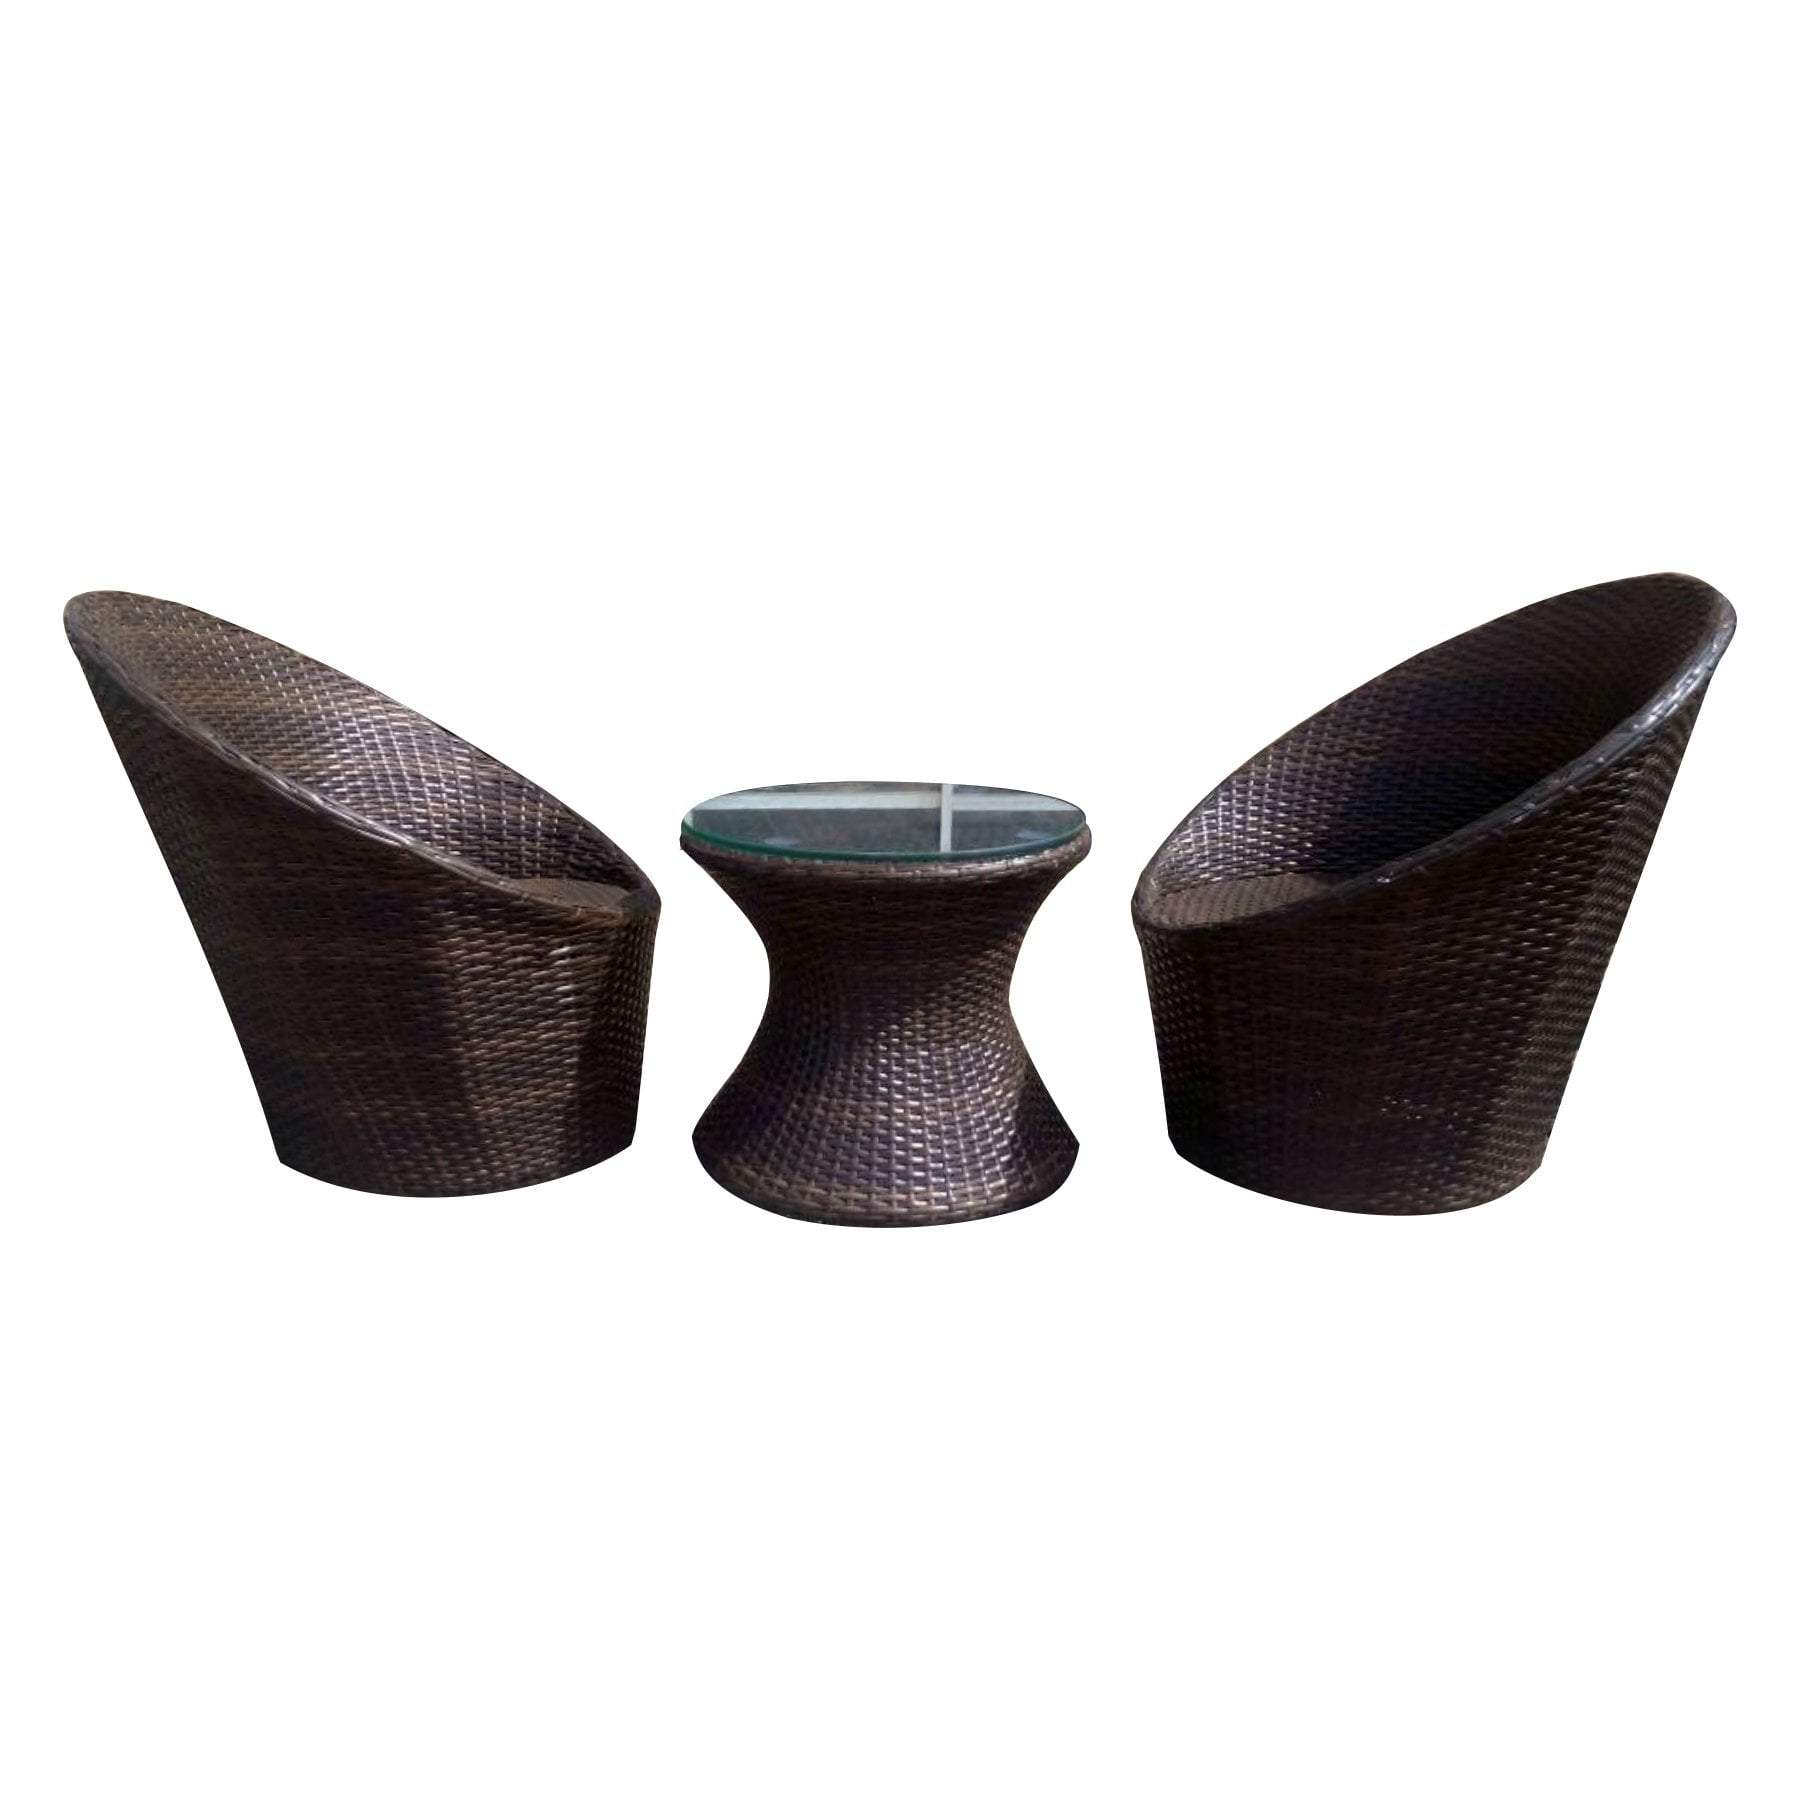 Oval 3-Piece Outdoor Rattan Patio Chair Set